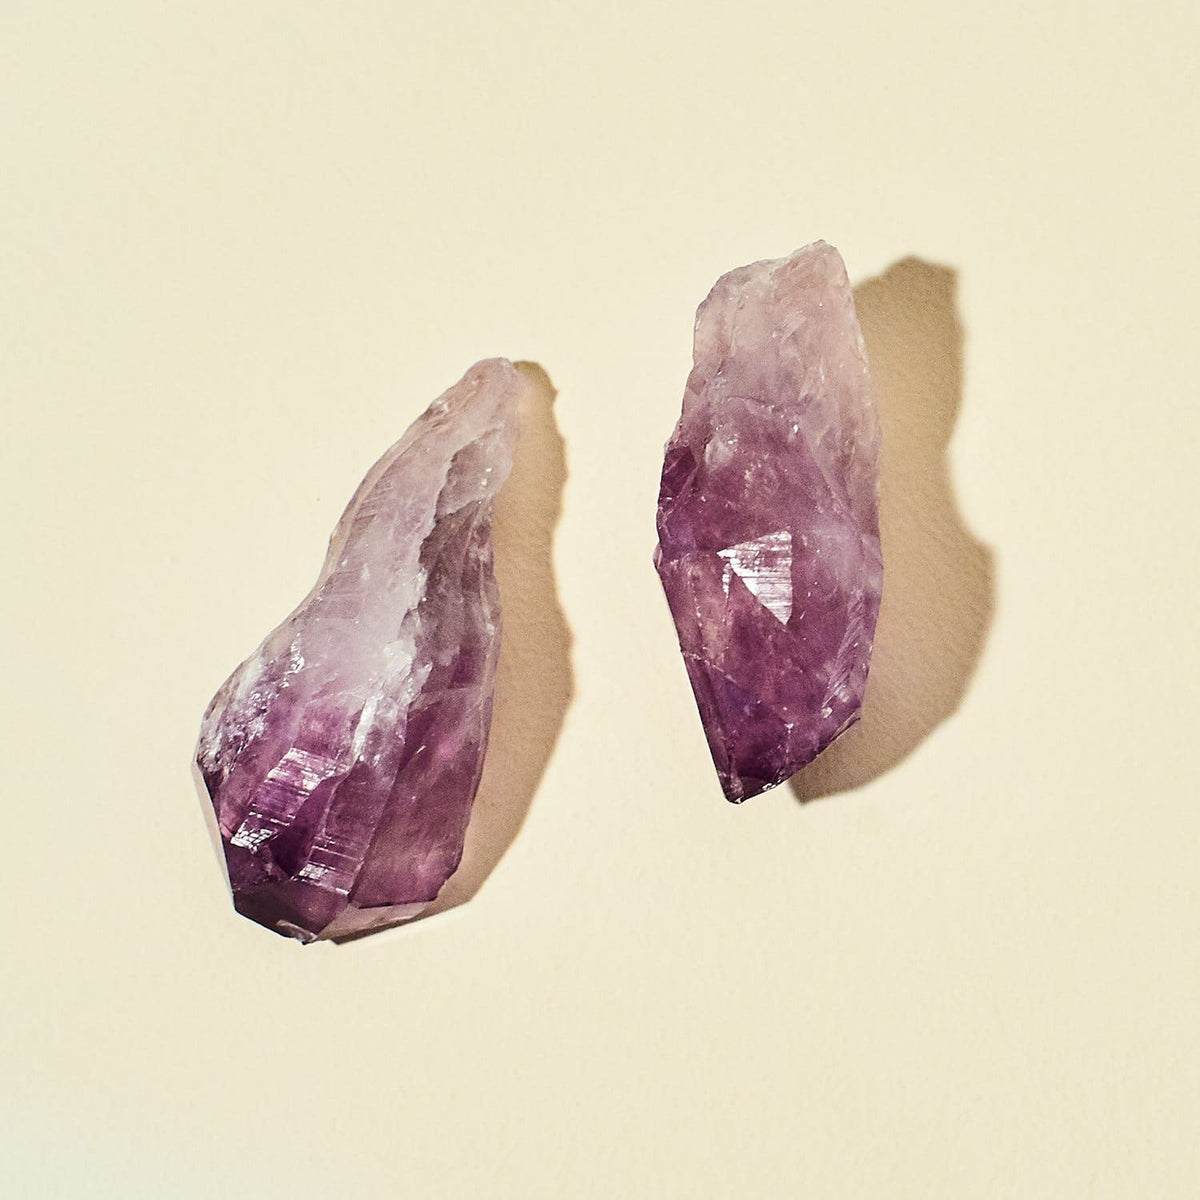 Pointed Amethyst - Large Crystal Crystal - Shoppe - Energy -